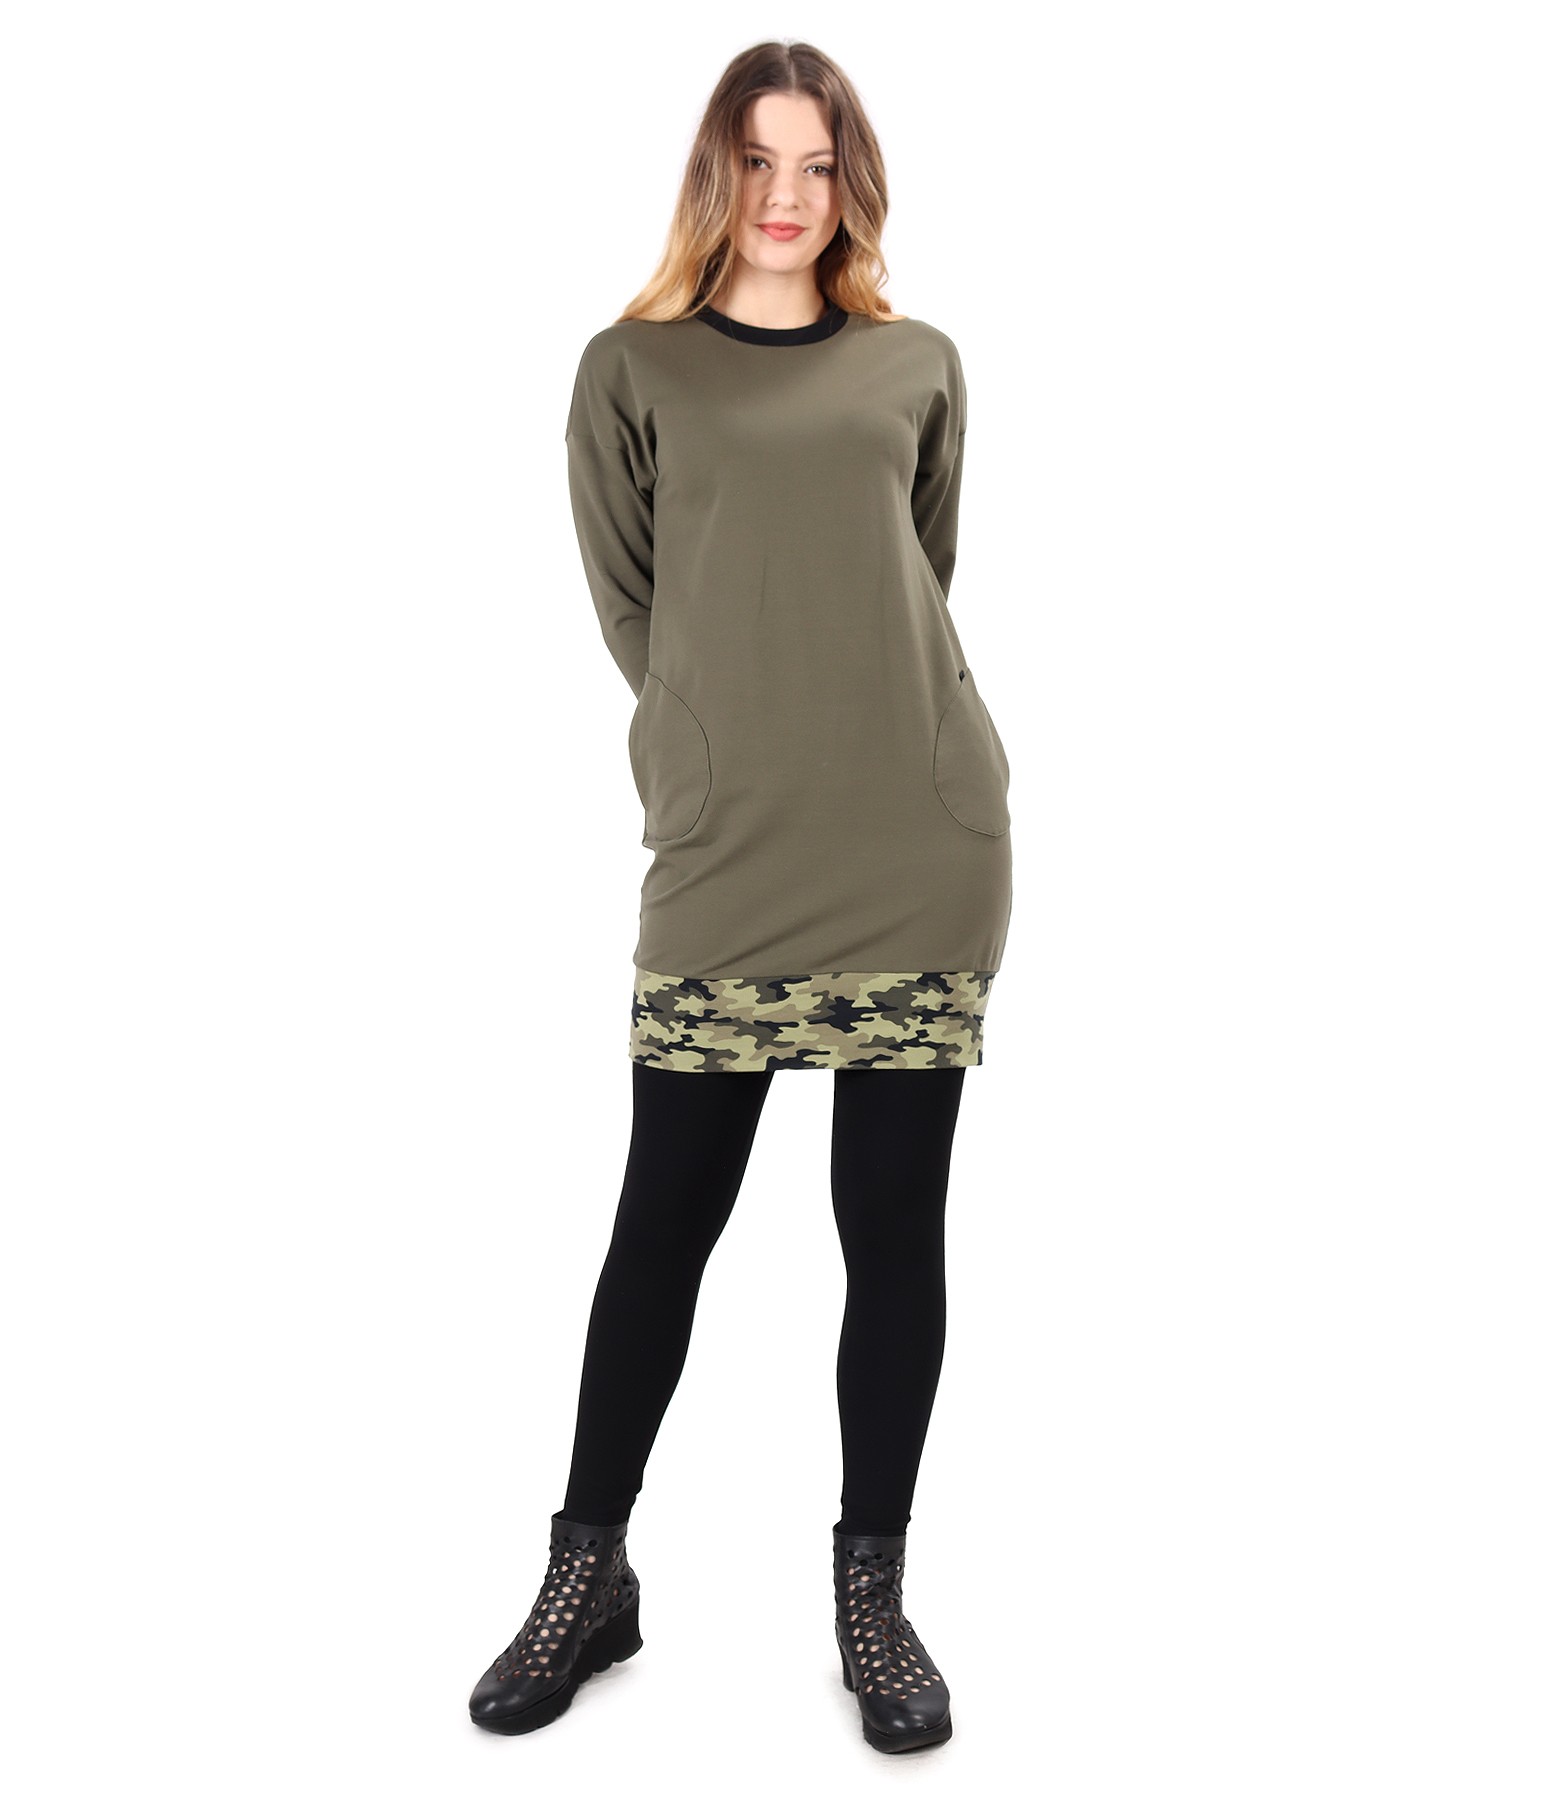 Smart casual outfit with sweatshirt dress and elastic jersey